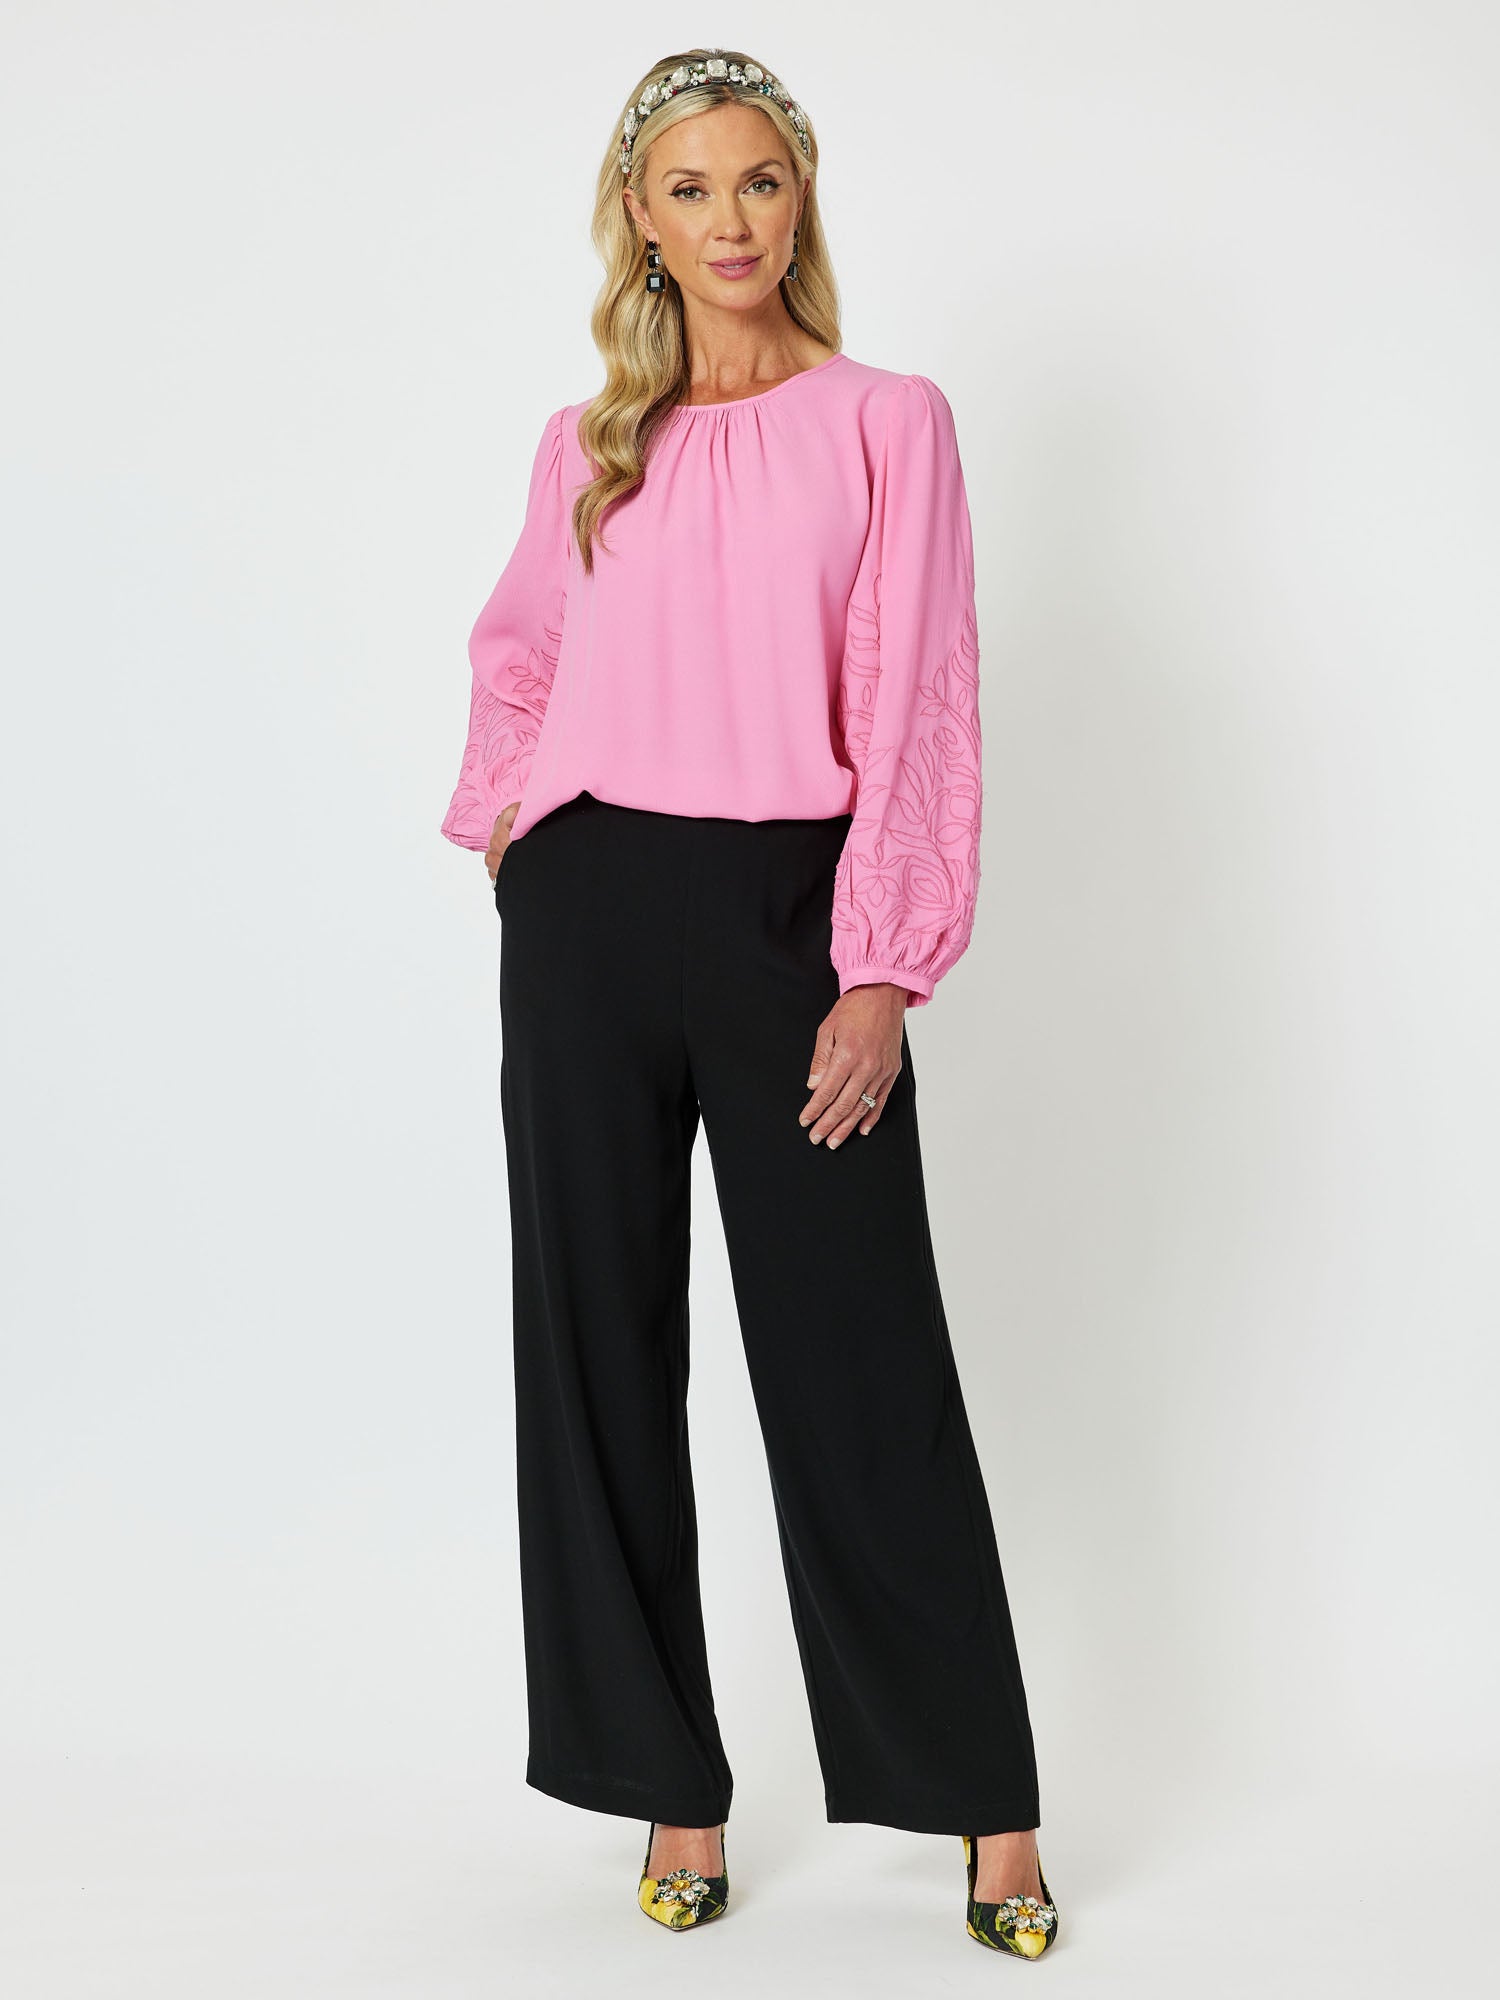 Saint Germain Embroidered Top - Candy